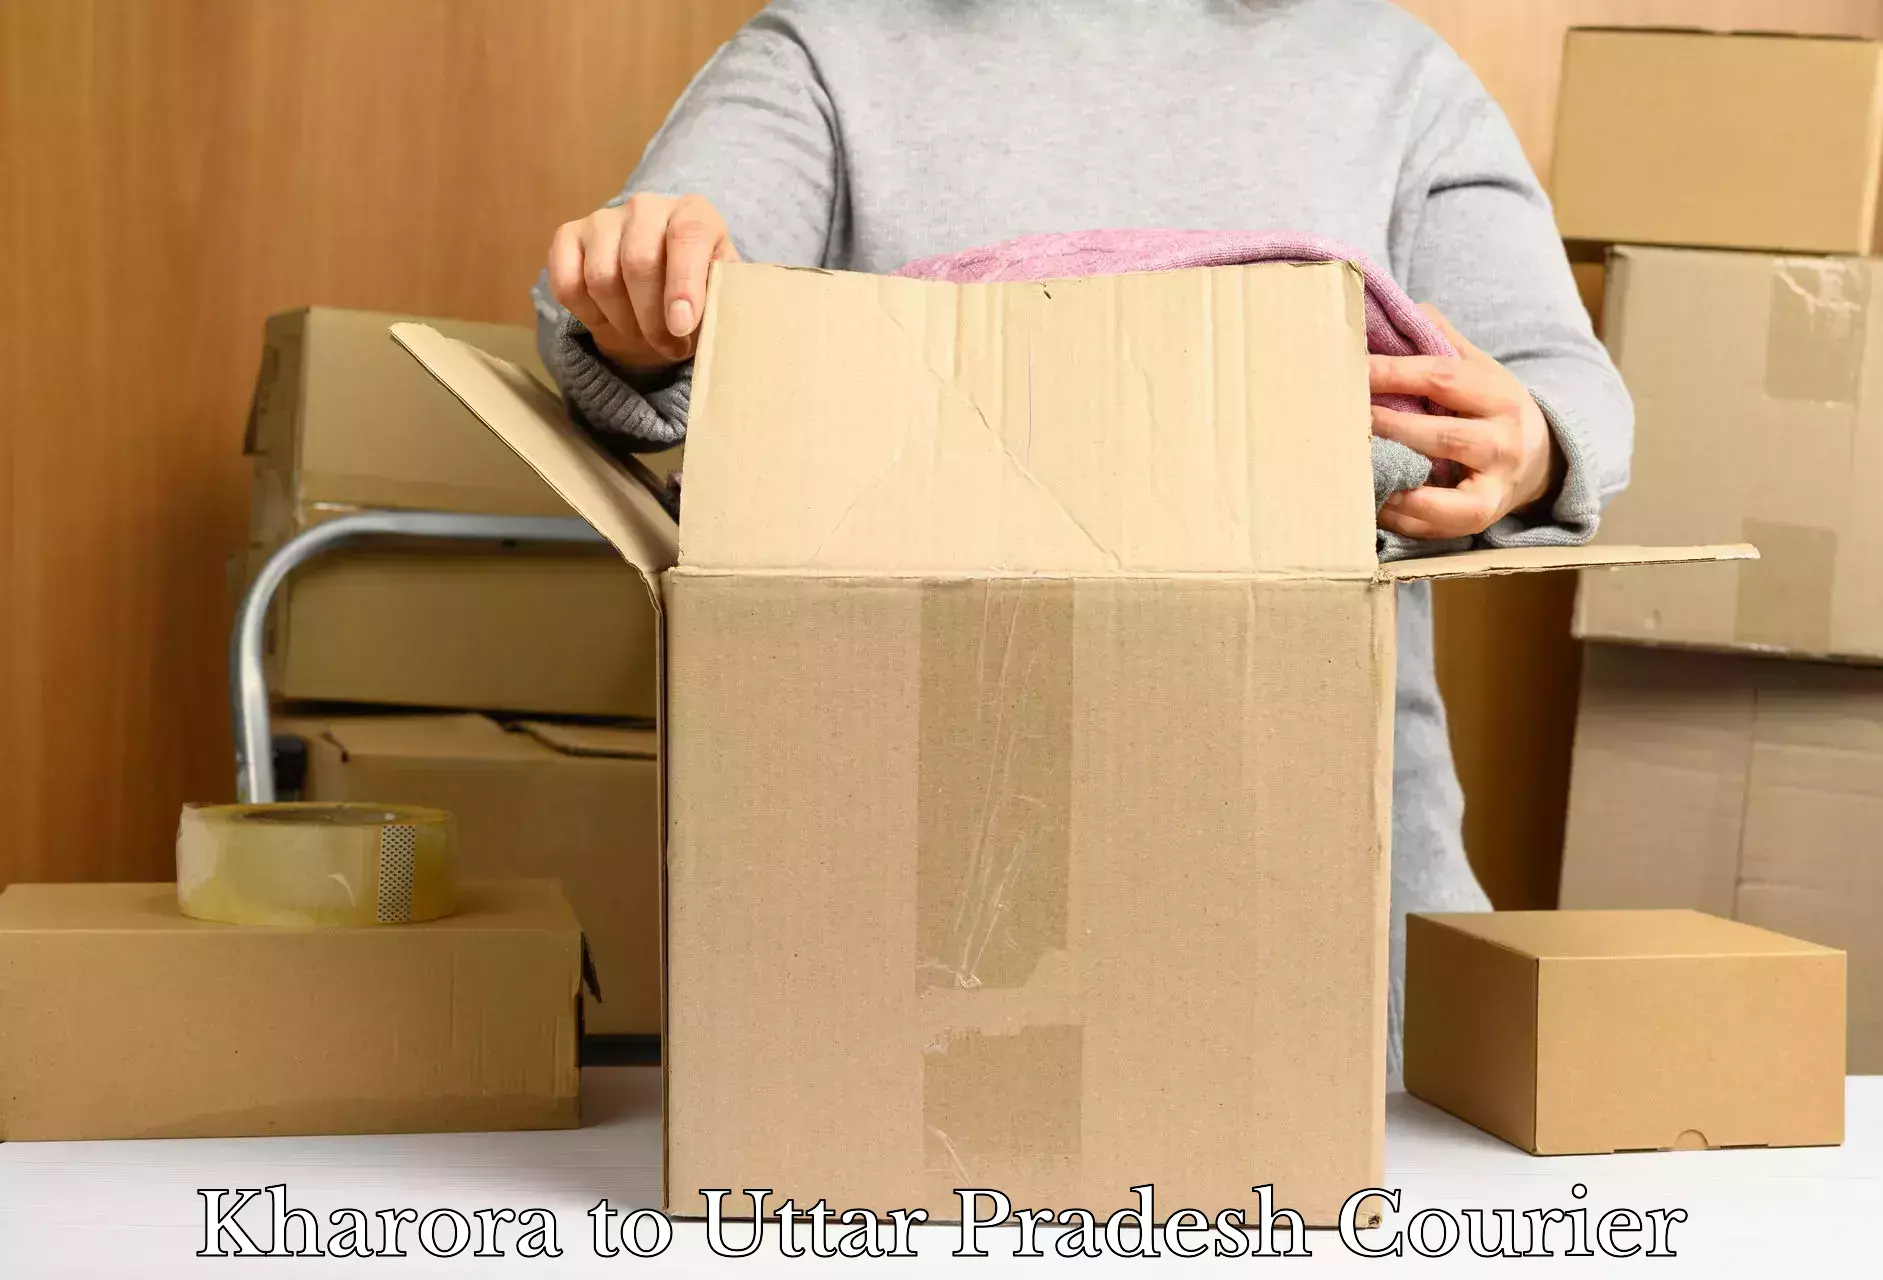 Packing and moving services in Kharora to Sidhauli